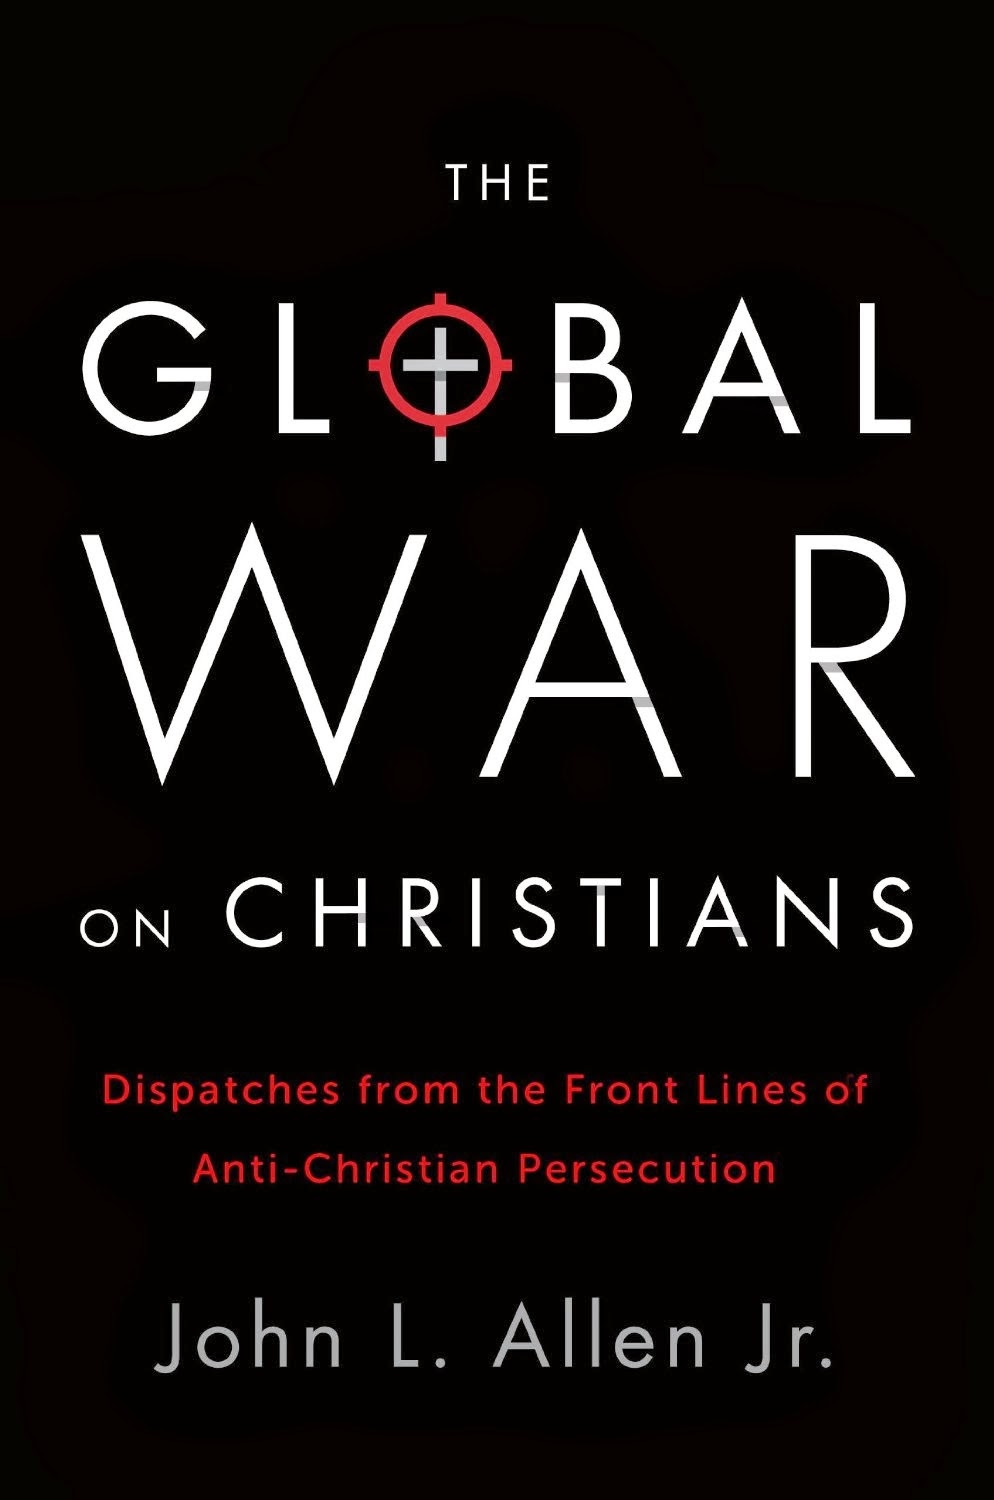 The Global War on Christians Dispatches from the Front Lines of Anti-Christian Persecution ebook download